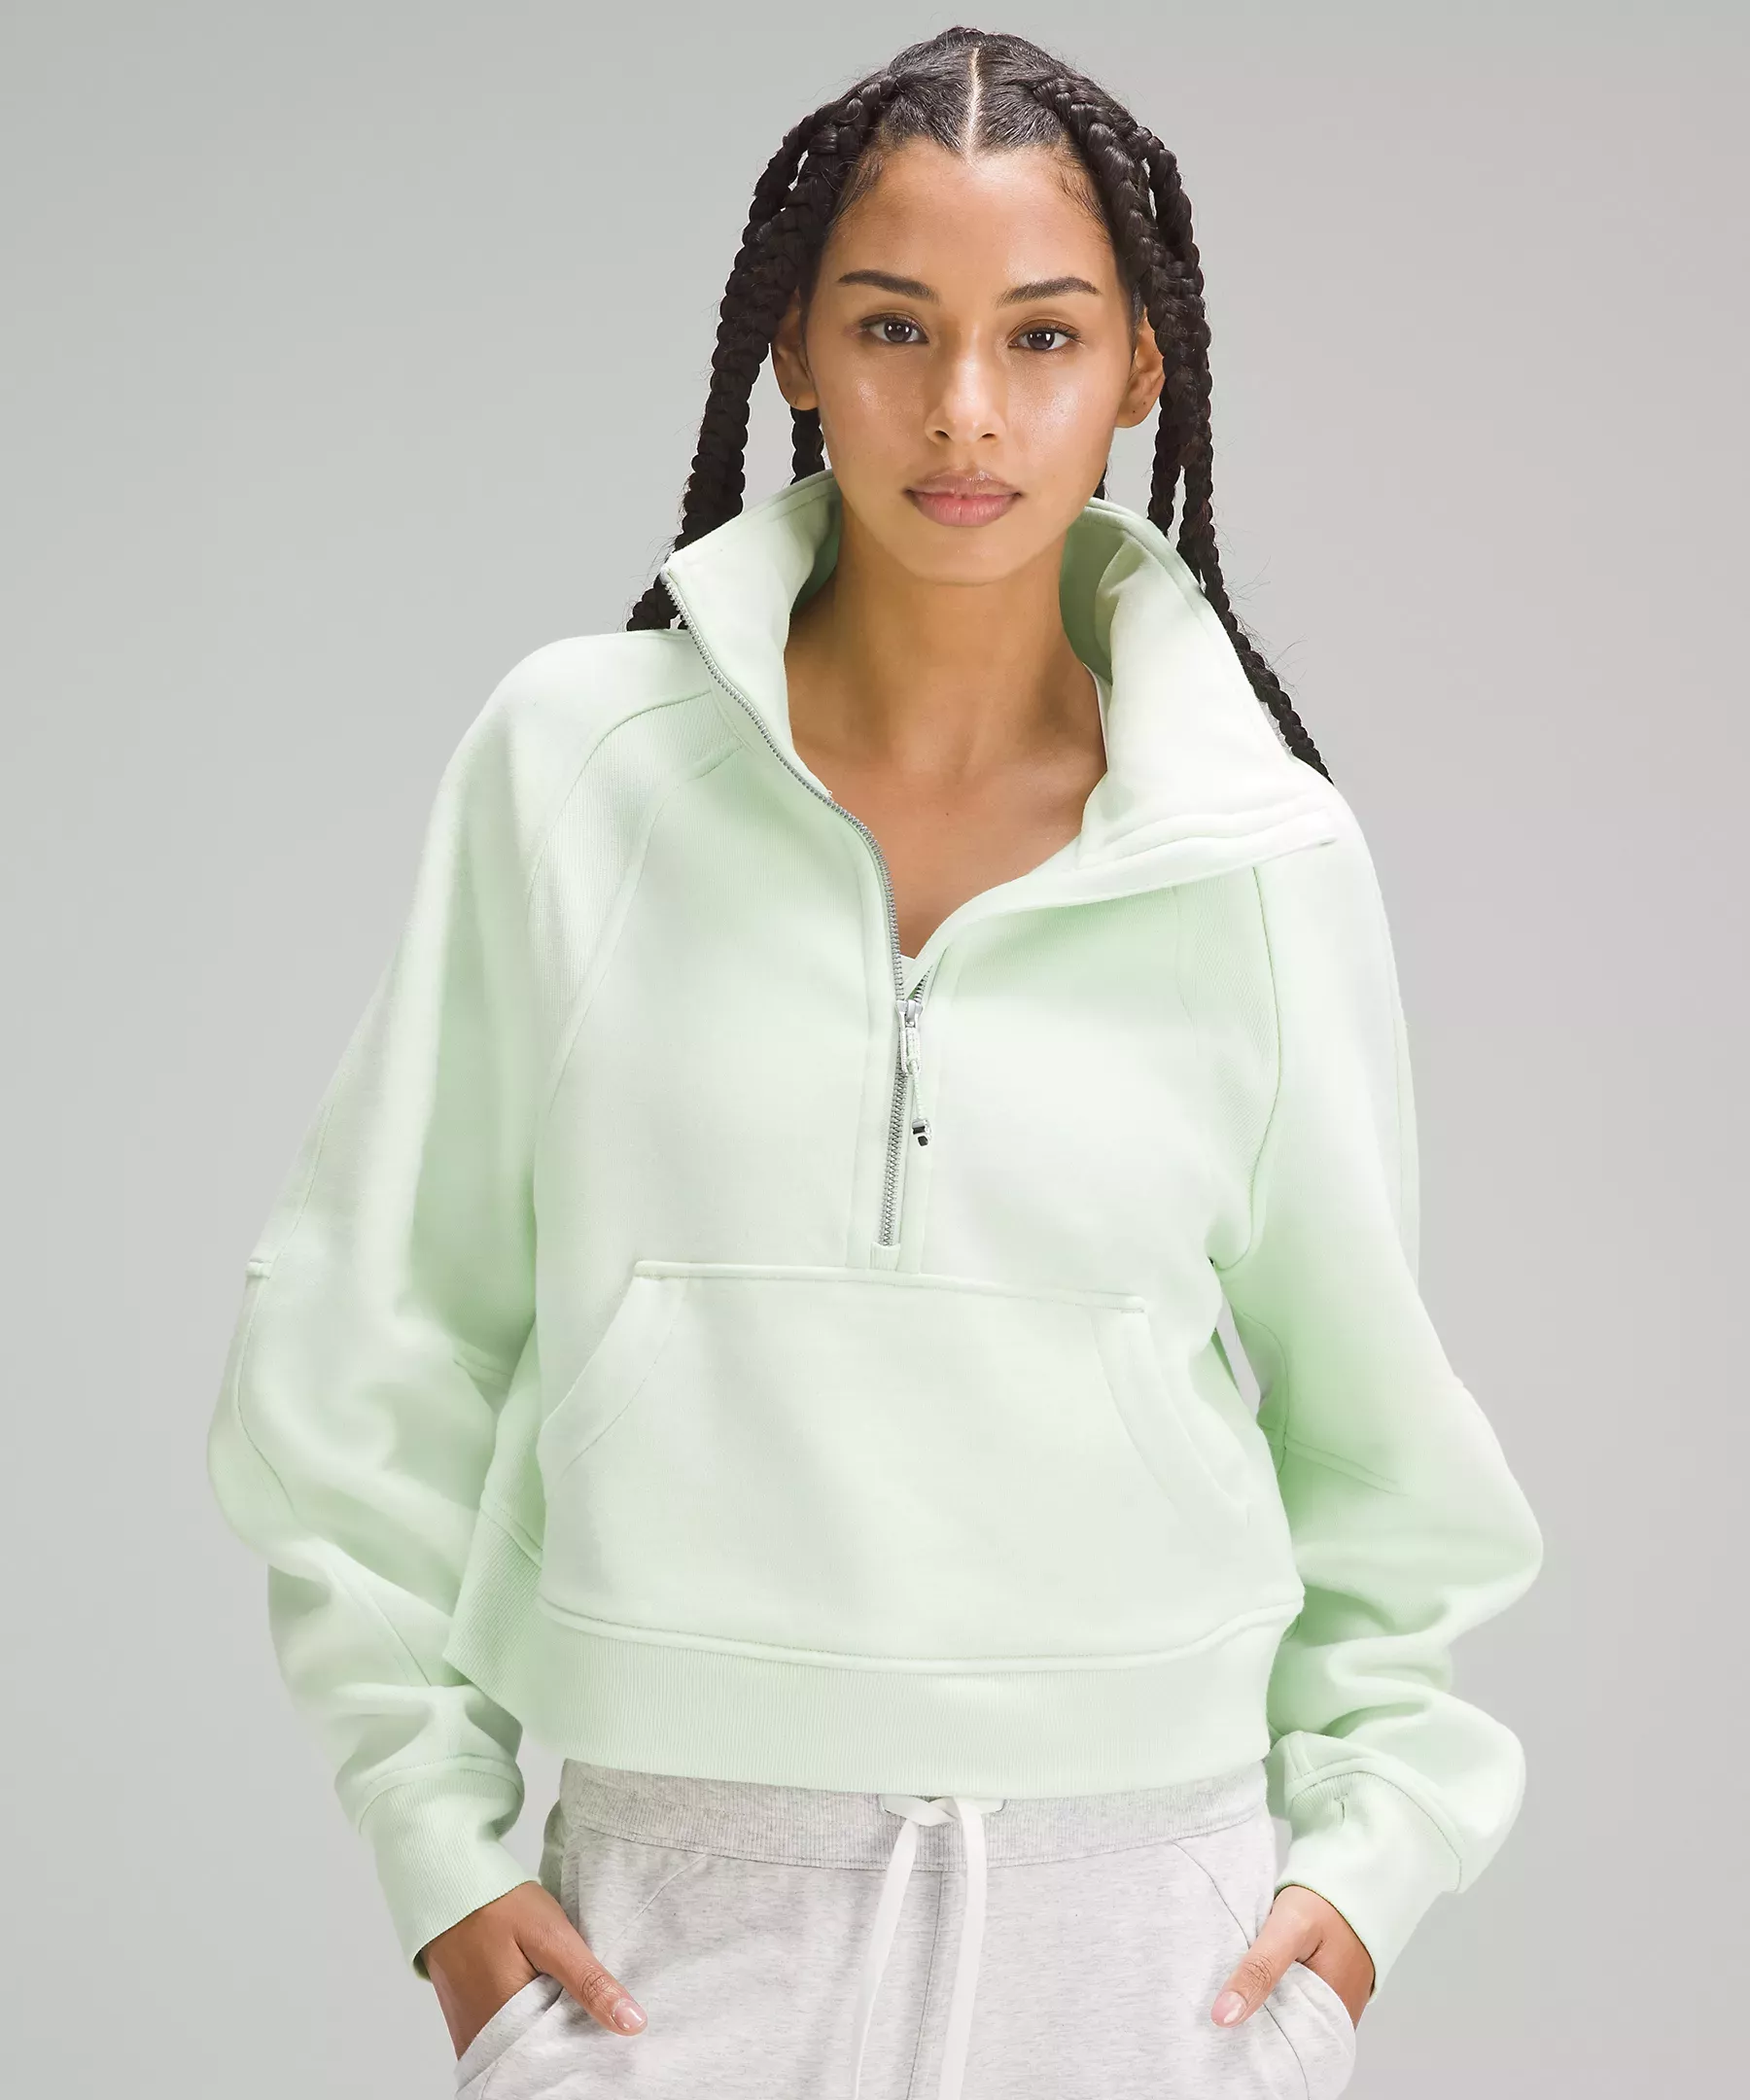 Thoughts on the Scuba half-zip in Bone? I bought the Scuba funnel-neck in  White Opal around a year ago, but the color seems darker/more yellow than  some other White Opal items I